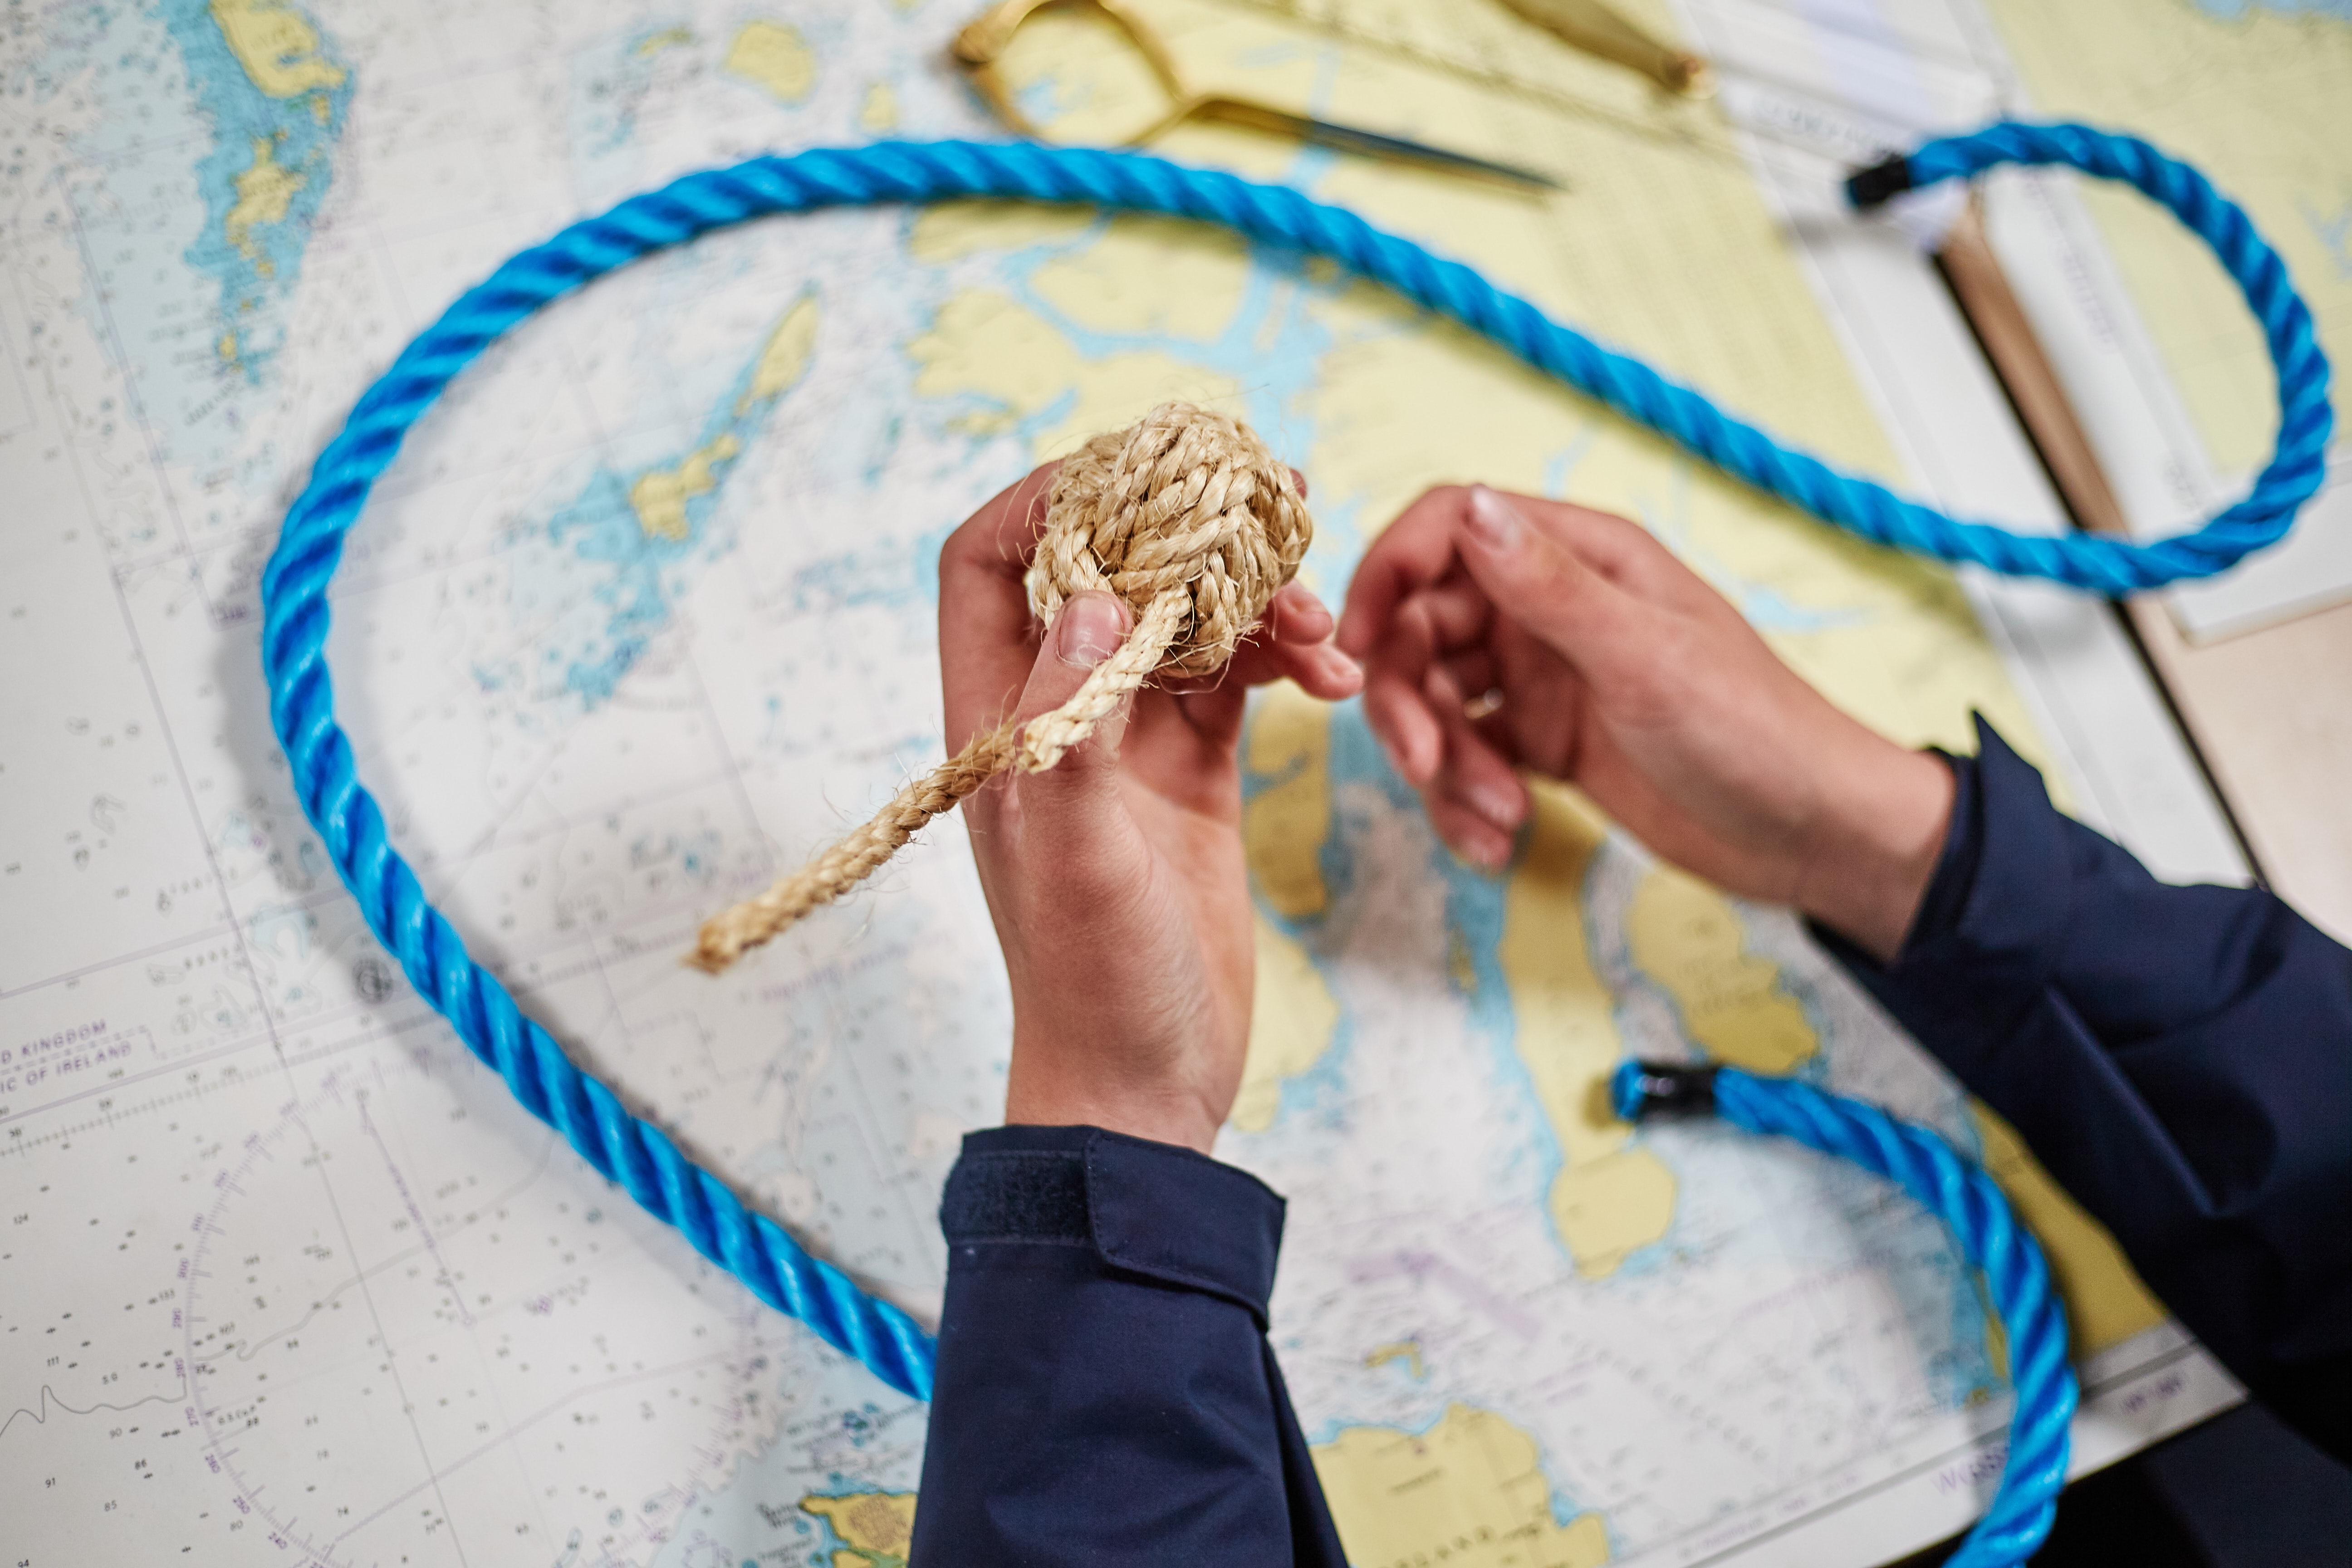 Maritime student learning knots